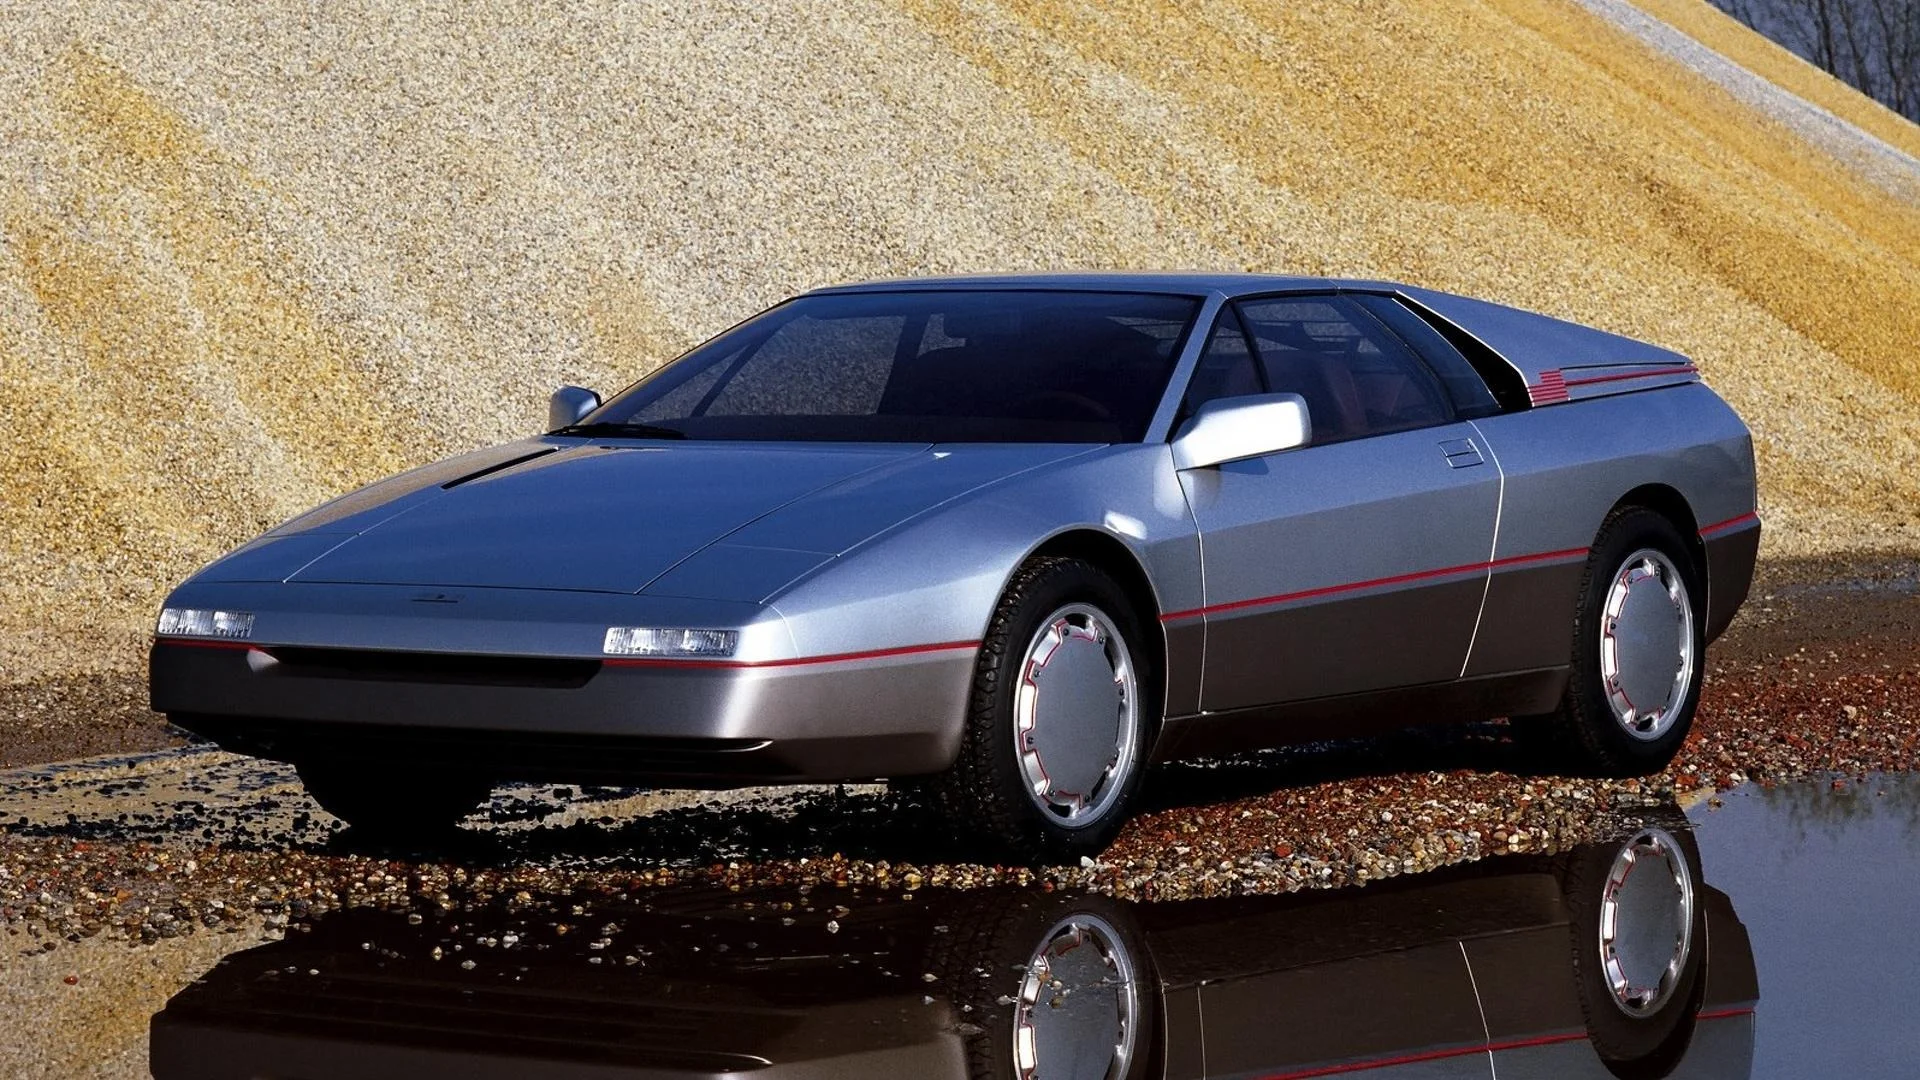 1984 Ford Maya Concept Info, Specs, Pictures, Wiki